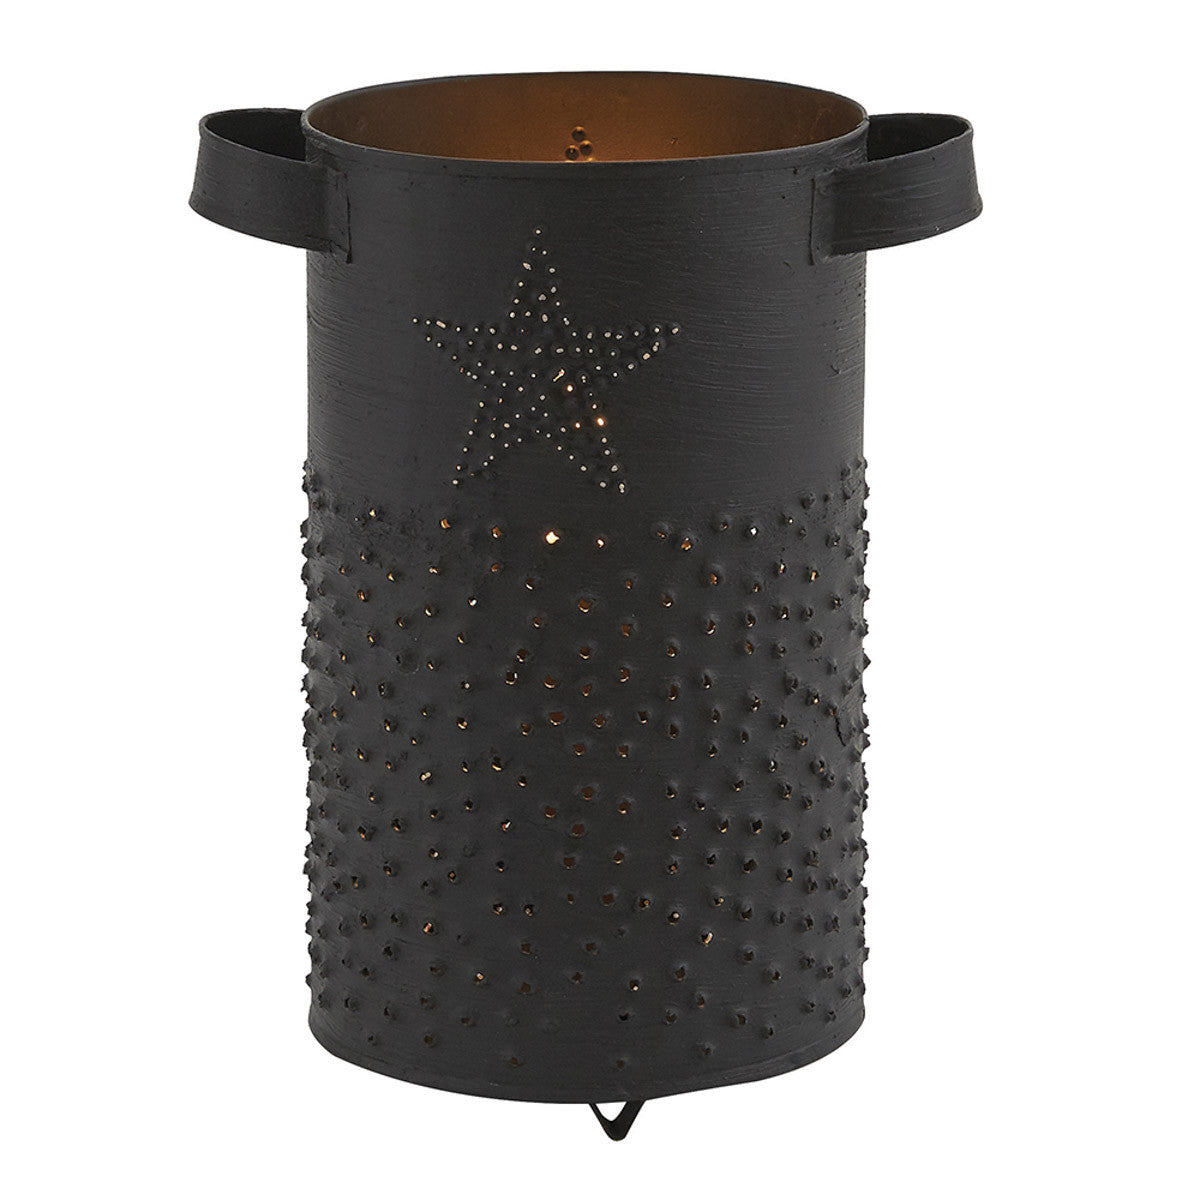 Punched Star Candle Holder Lamp - Pillar Park Designs